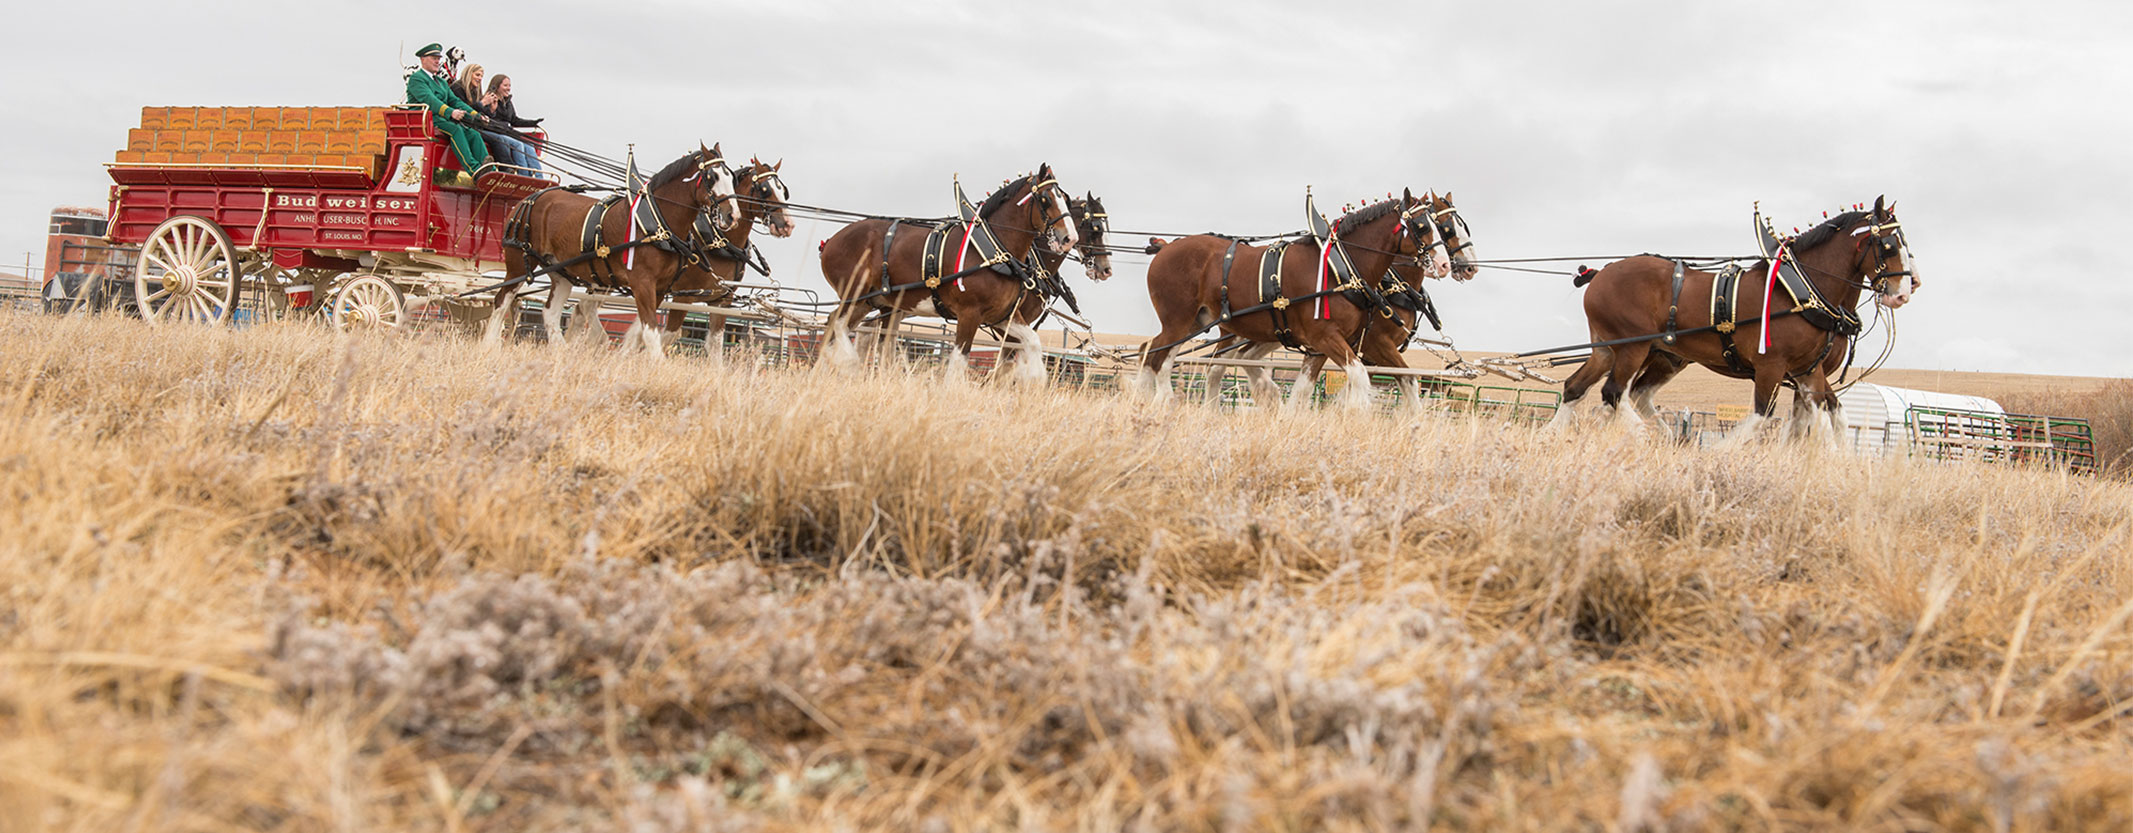 Clydesdale Horses Pulling A Wagon Across A Field